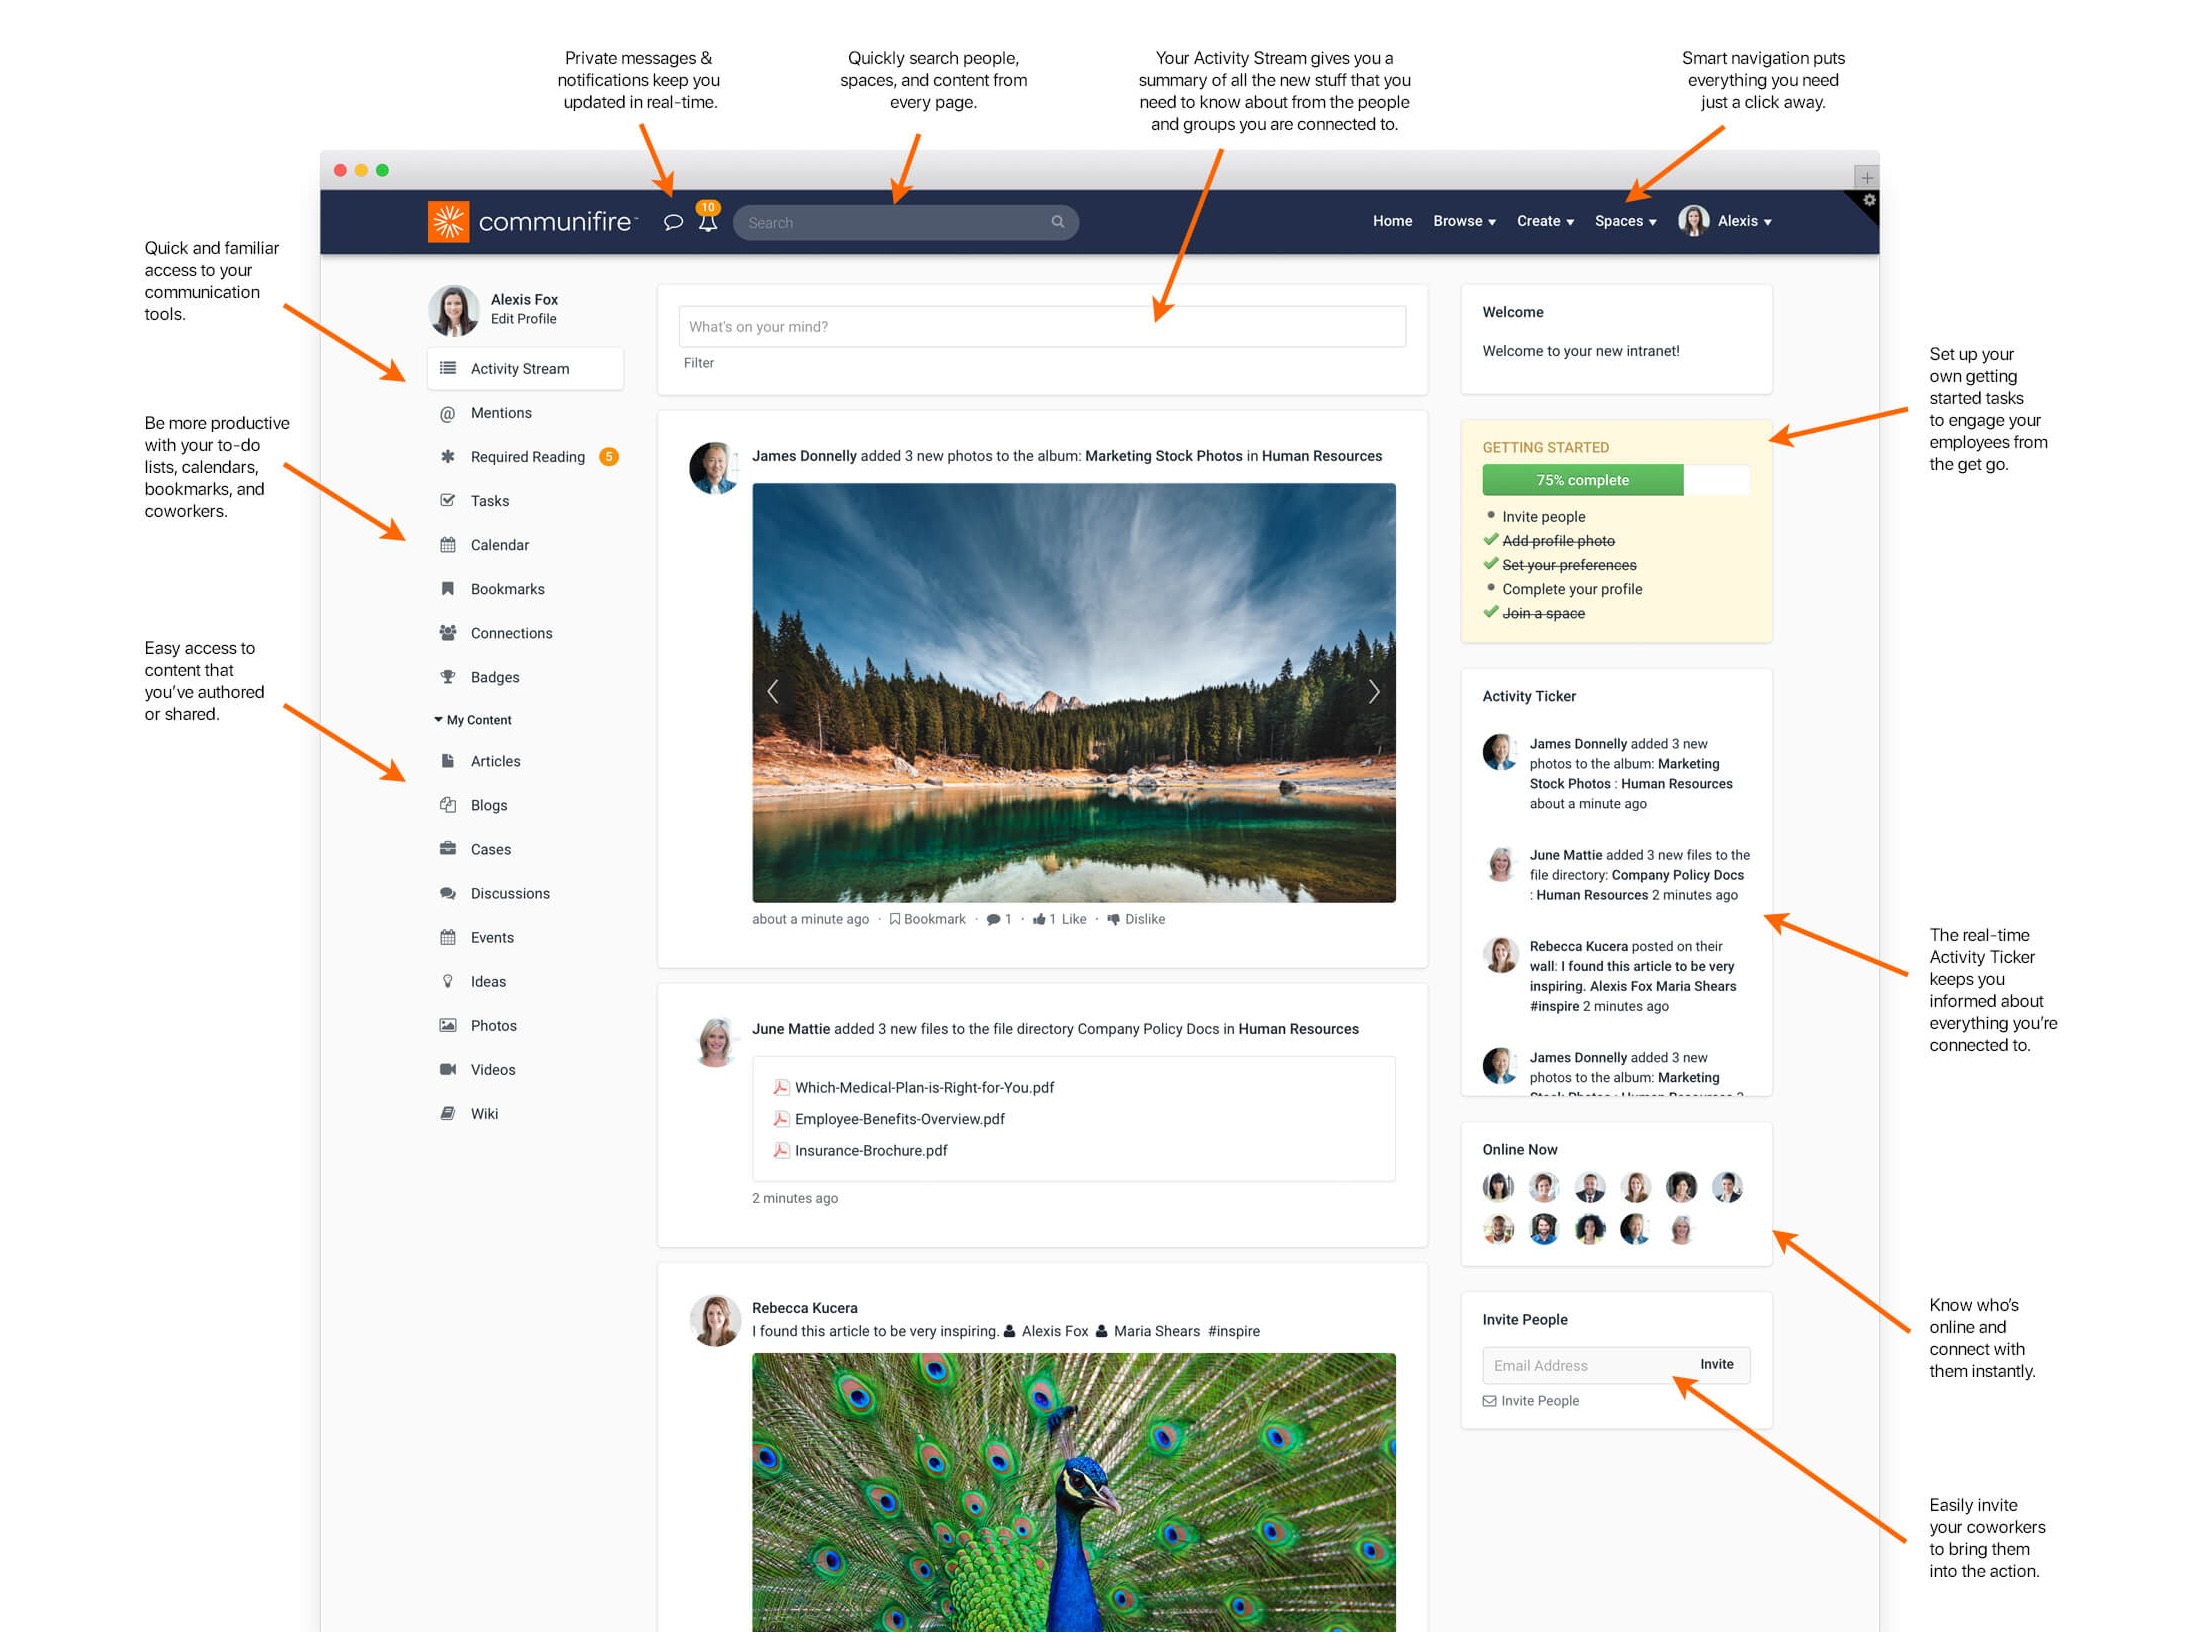 intranet features - activity stream